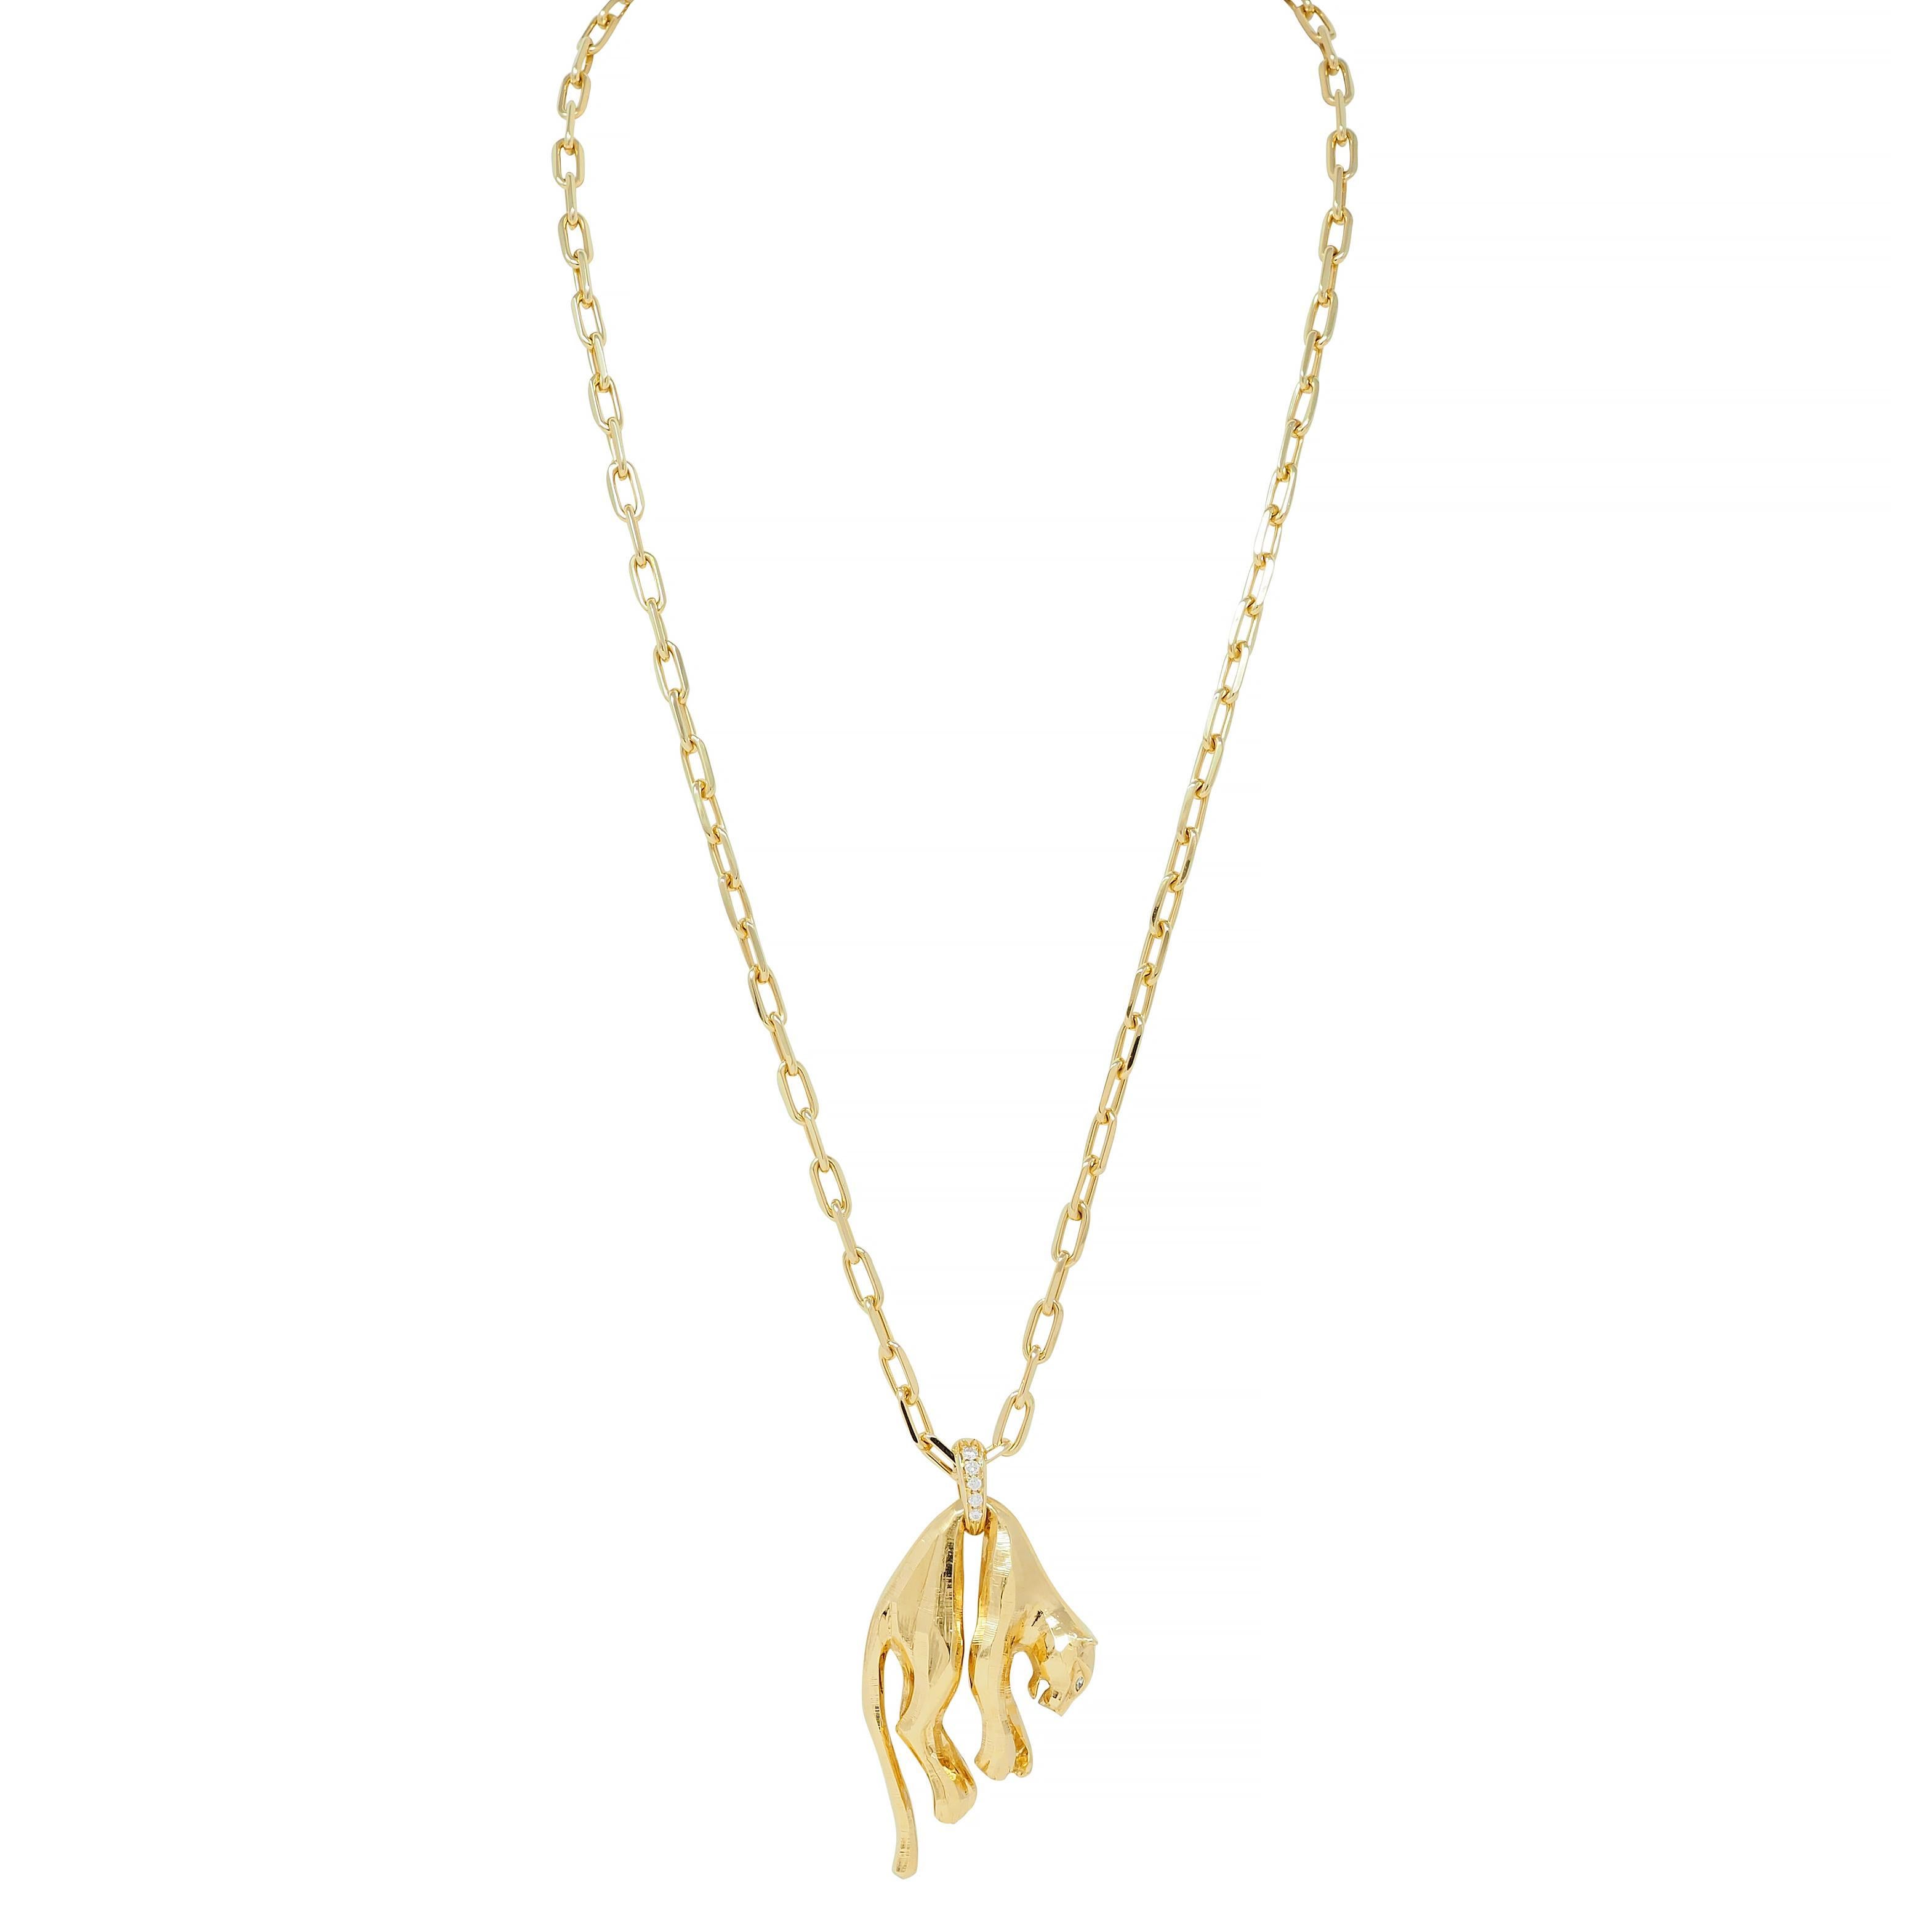 Comprised of paperclip link chain suspending a stylized panther pendant
Depicted hanging from midsection and draped over looped bale 
Designed with faceted surface and subtle linear texture
Bale features graduated round brilliant cut diamonds
With